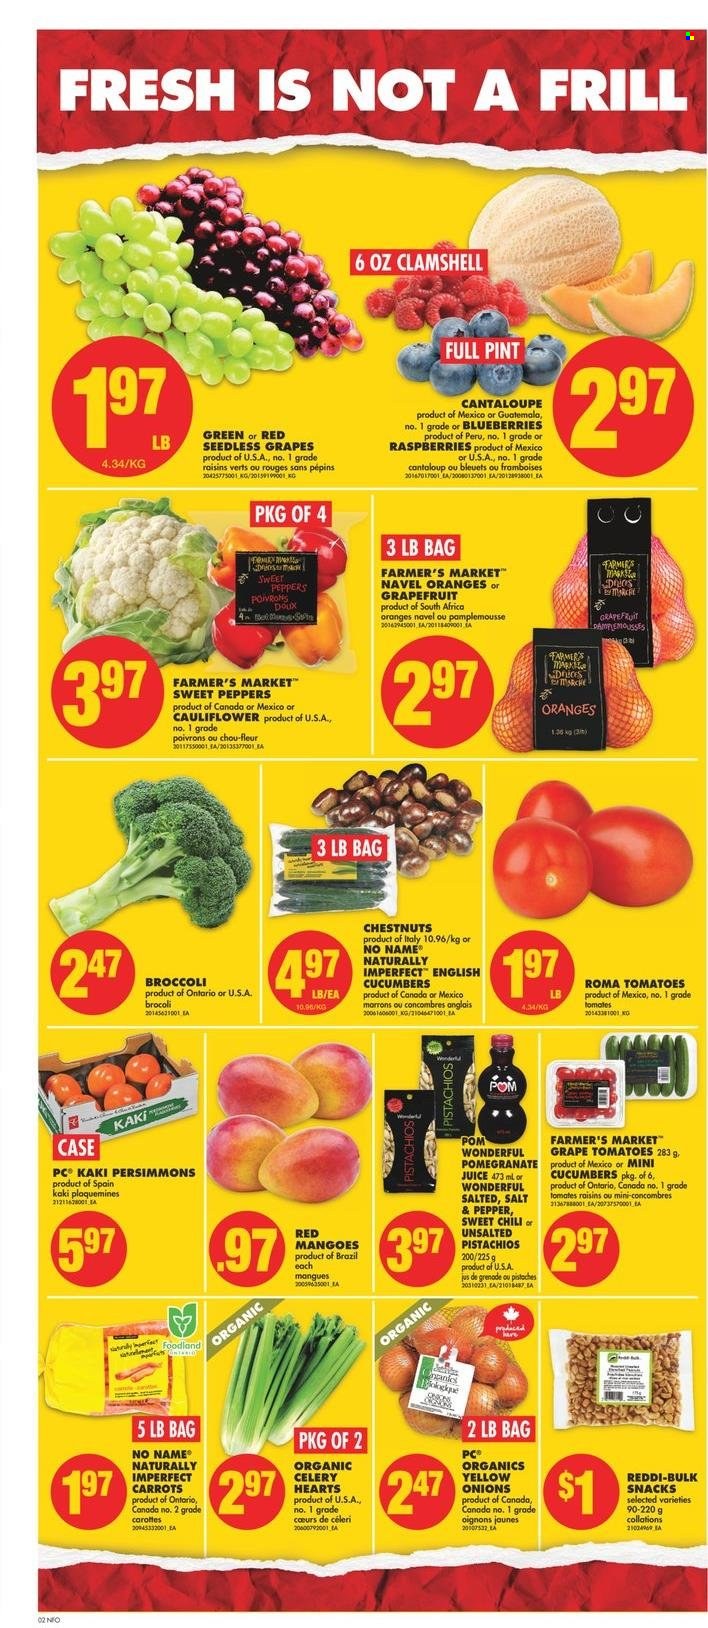 thumbnail - No Frills Flyer - November 25, 2021 - December 01, 2021 - Sales products - broccoli, cantaloupe, carrots, cauliflower, celery, cucumber, sweet peppers, tomatoes, onion, peppers, sleeved celery, blueberries, grapefruits, seedless grapes, persimmons, pomegranate, navel oranges, No Name, snack, chestnuts, dried fruit, pistachios, juice, raisins, oranges. Page 3.